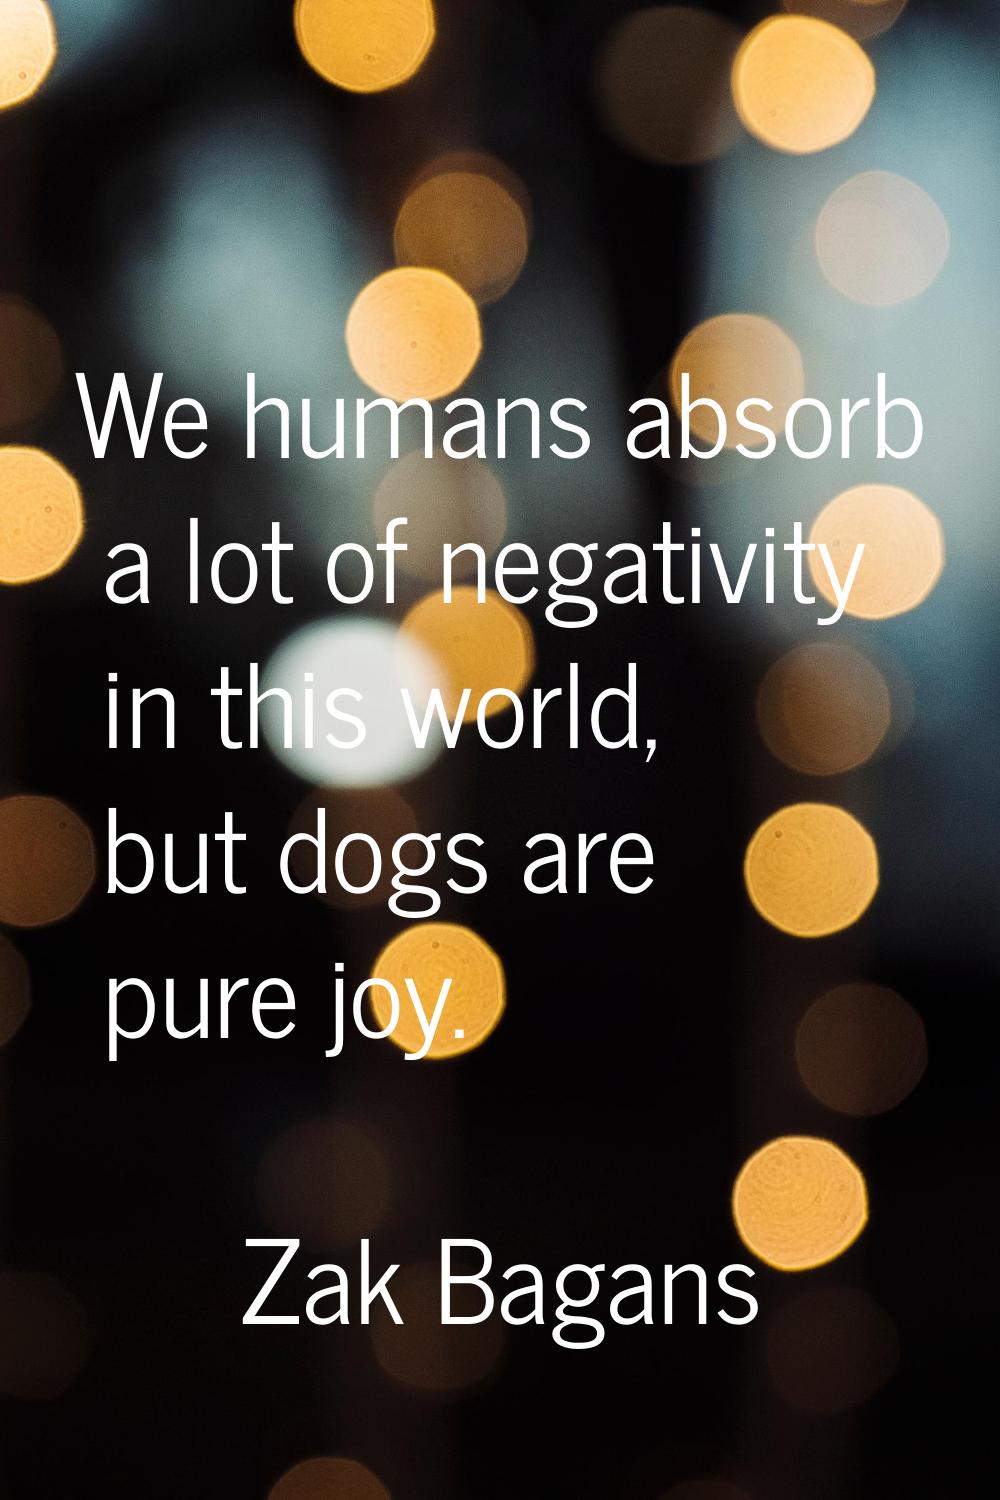 We humans absorb a lot of negativity in this world, but dogs are pure joy.